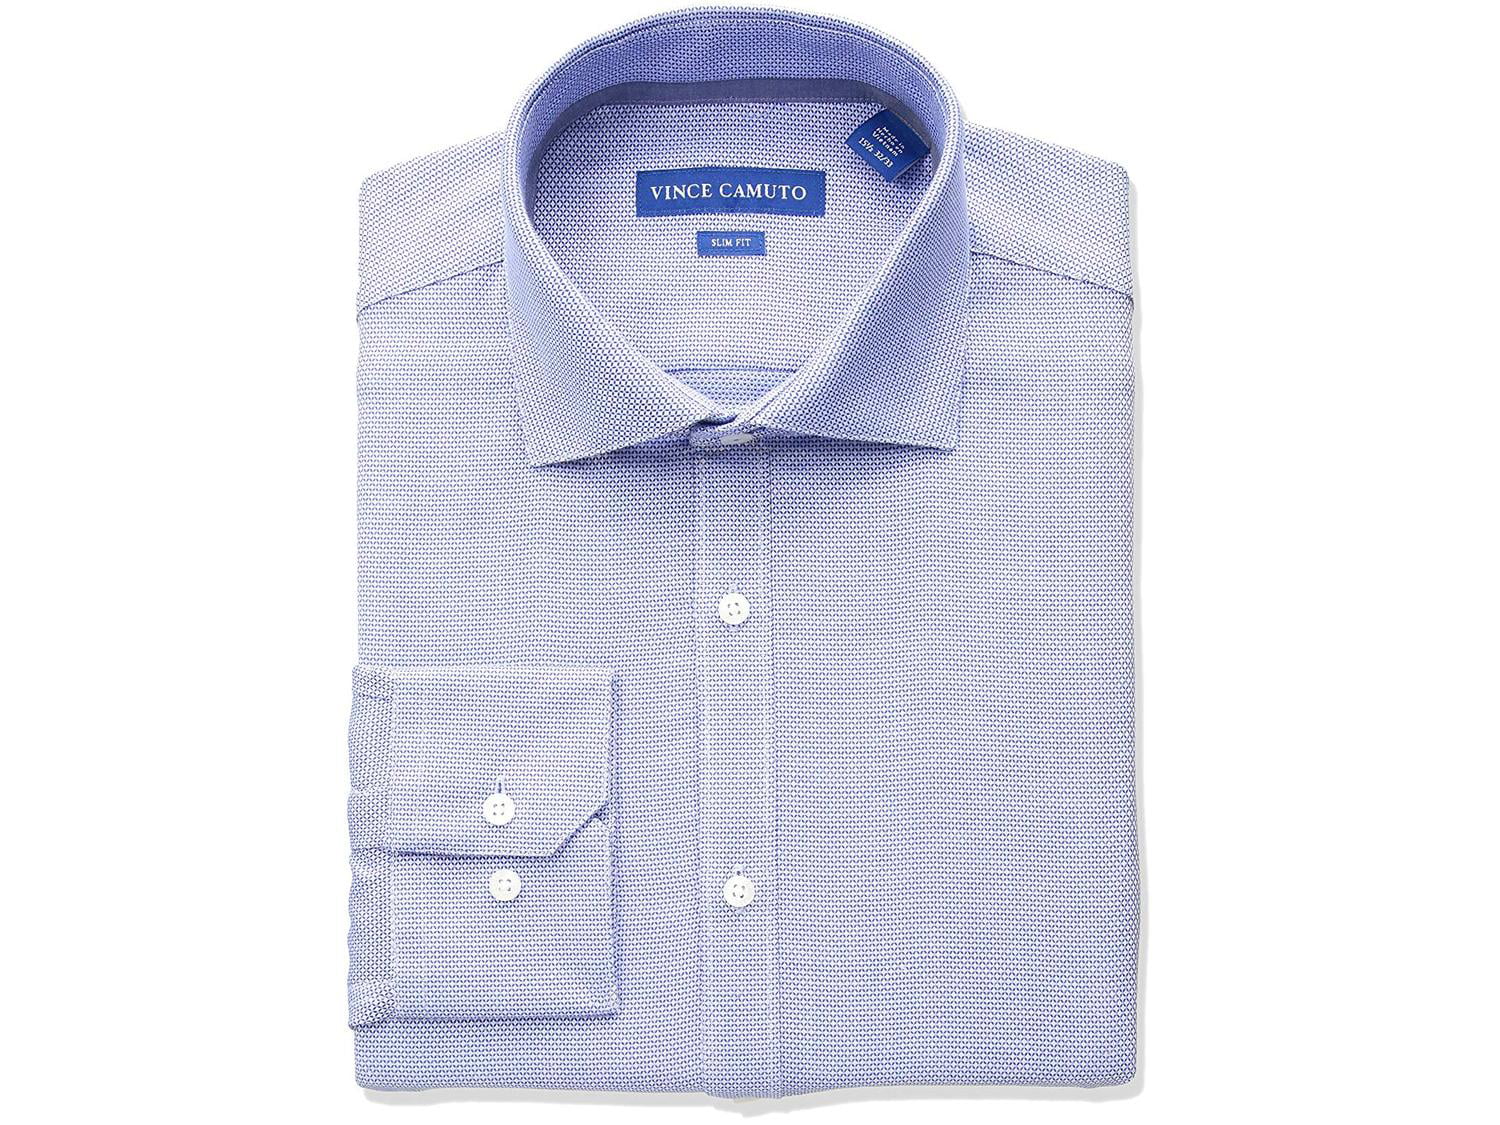 Vince Camuto Mens Slim Fit Textured Dobby Dress Shirt 